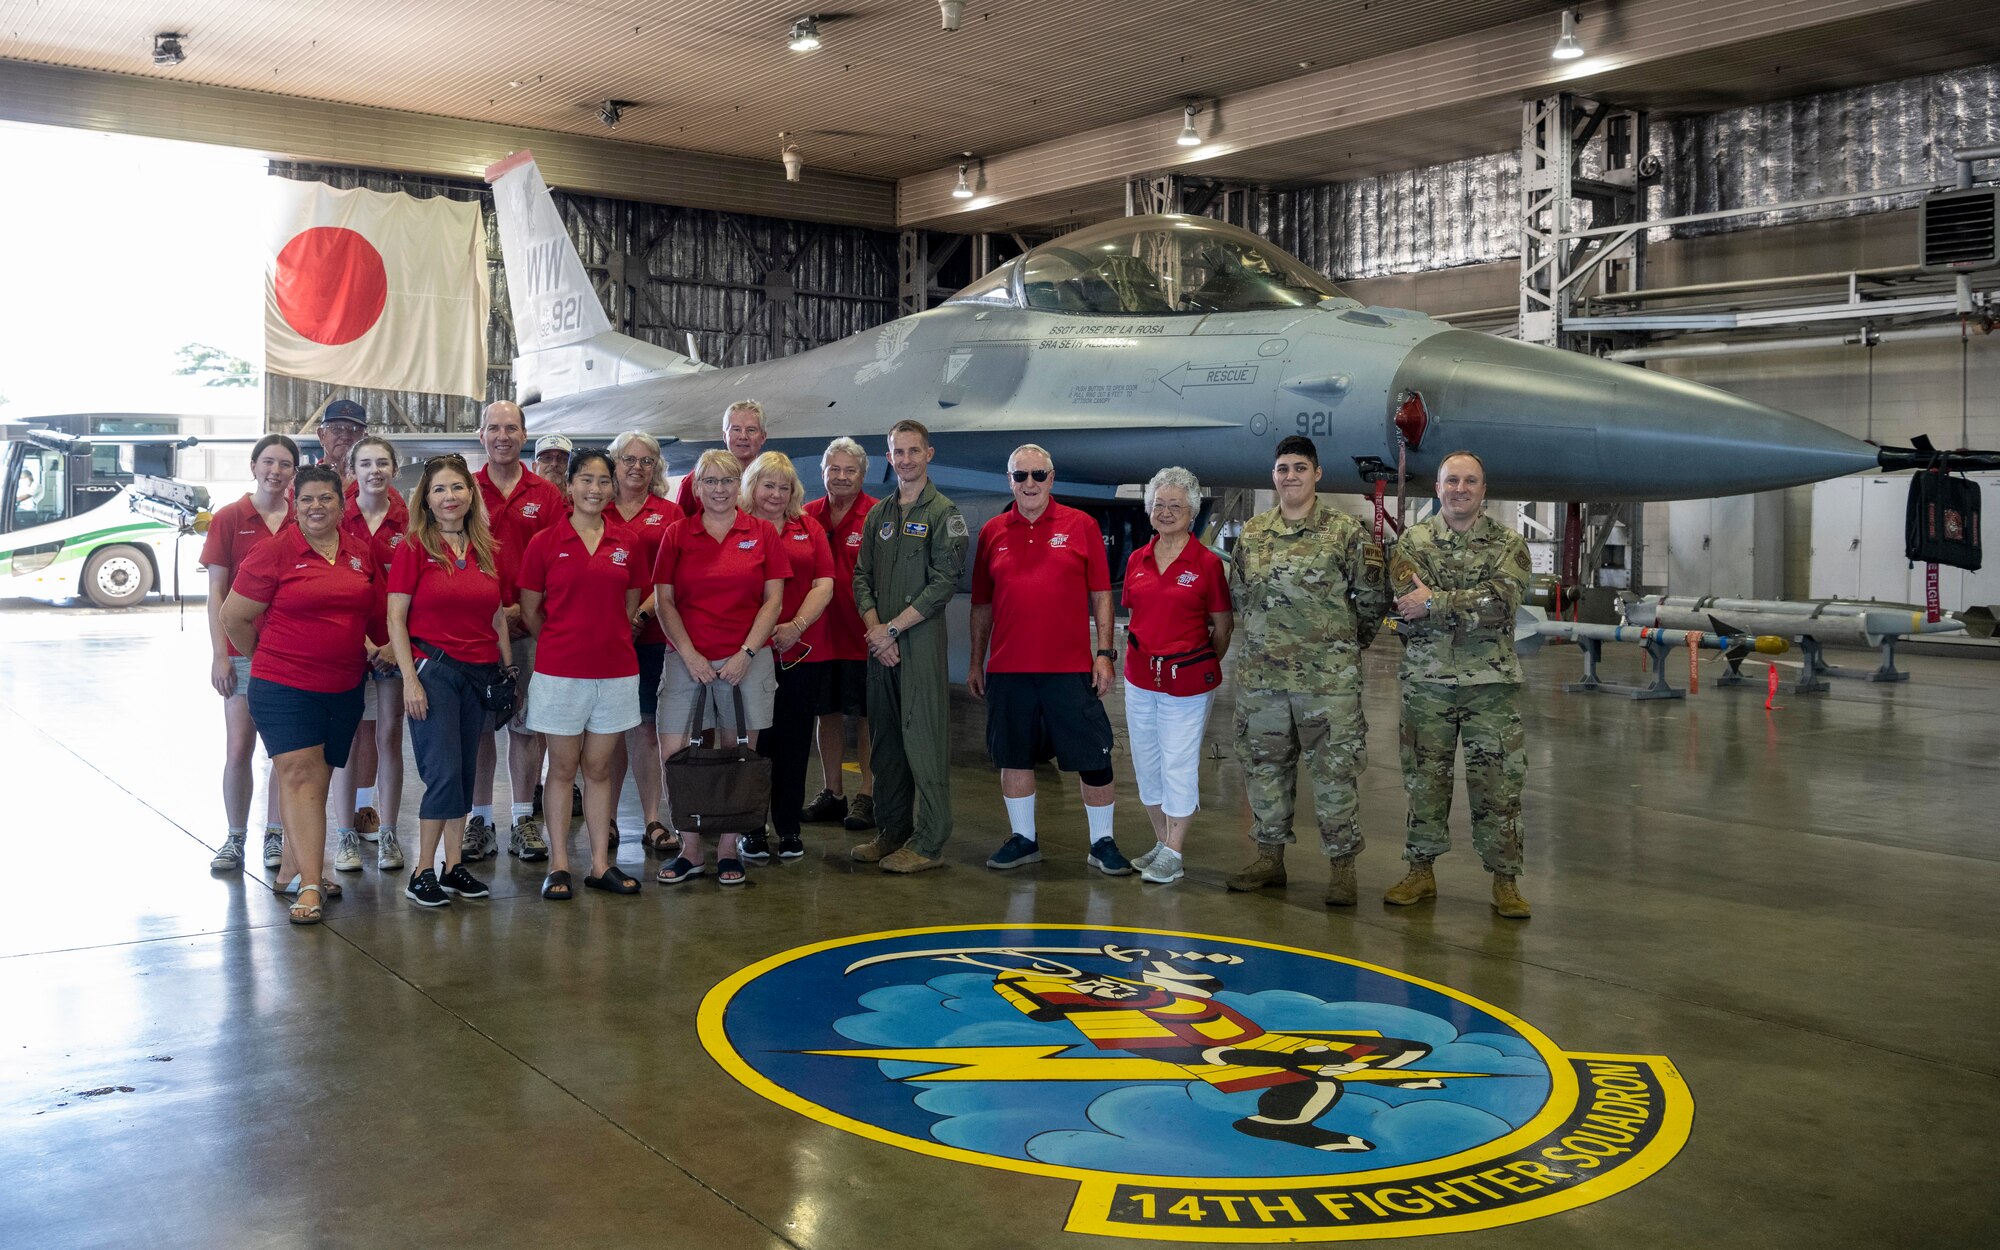 Sister city delegates pose with 35th Fighter Wing leadership in front of an F-16